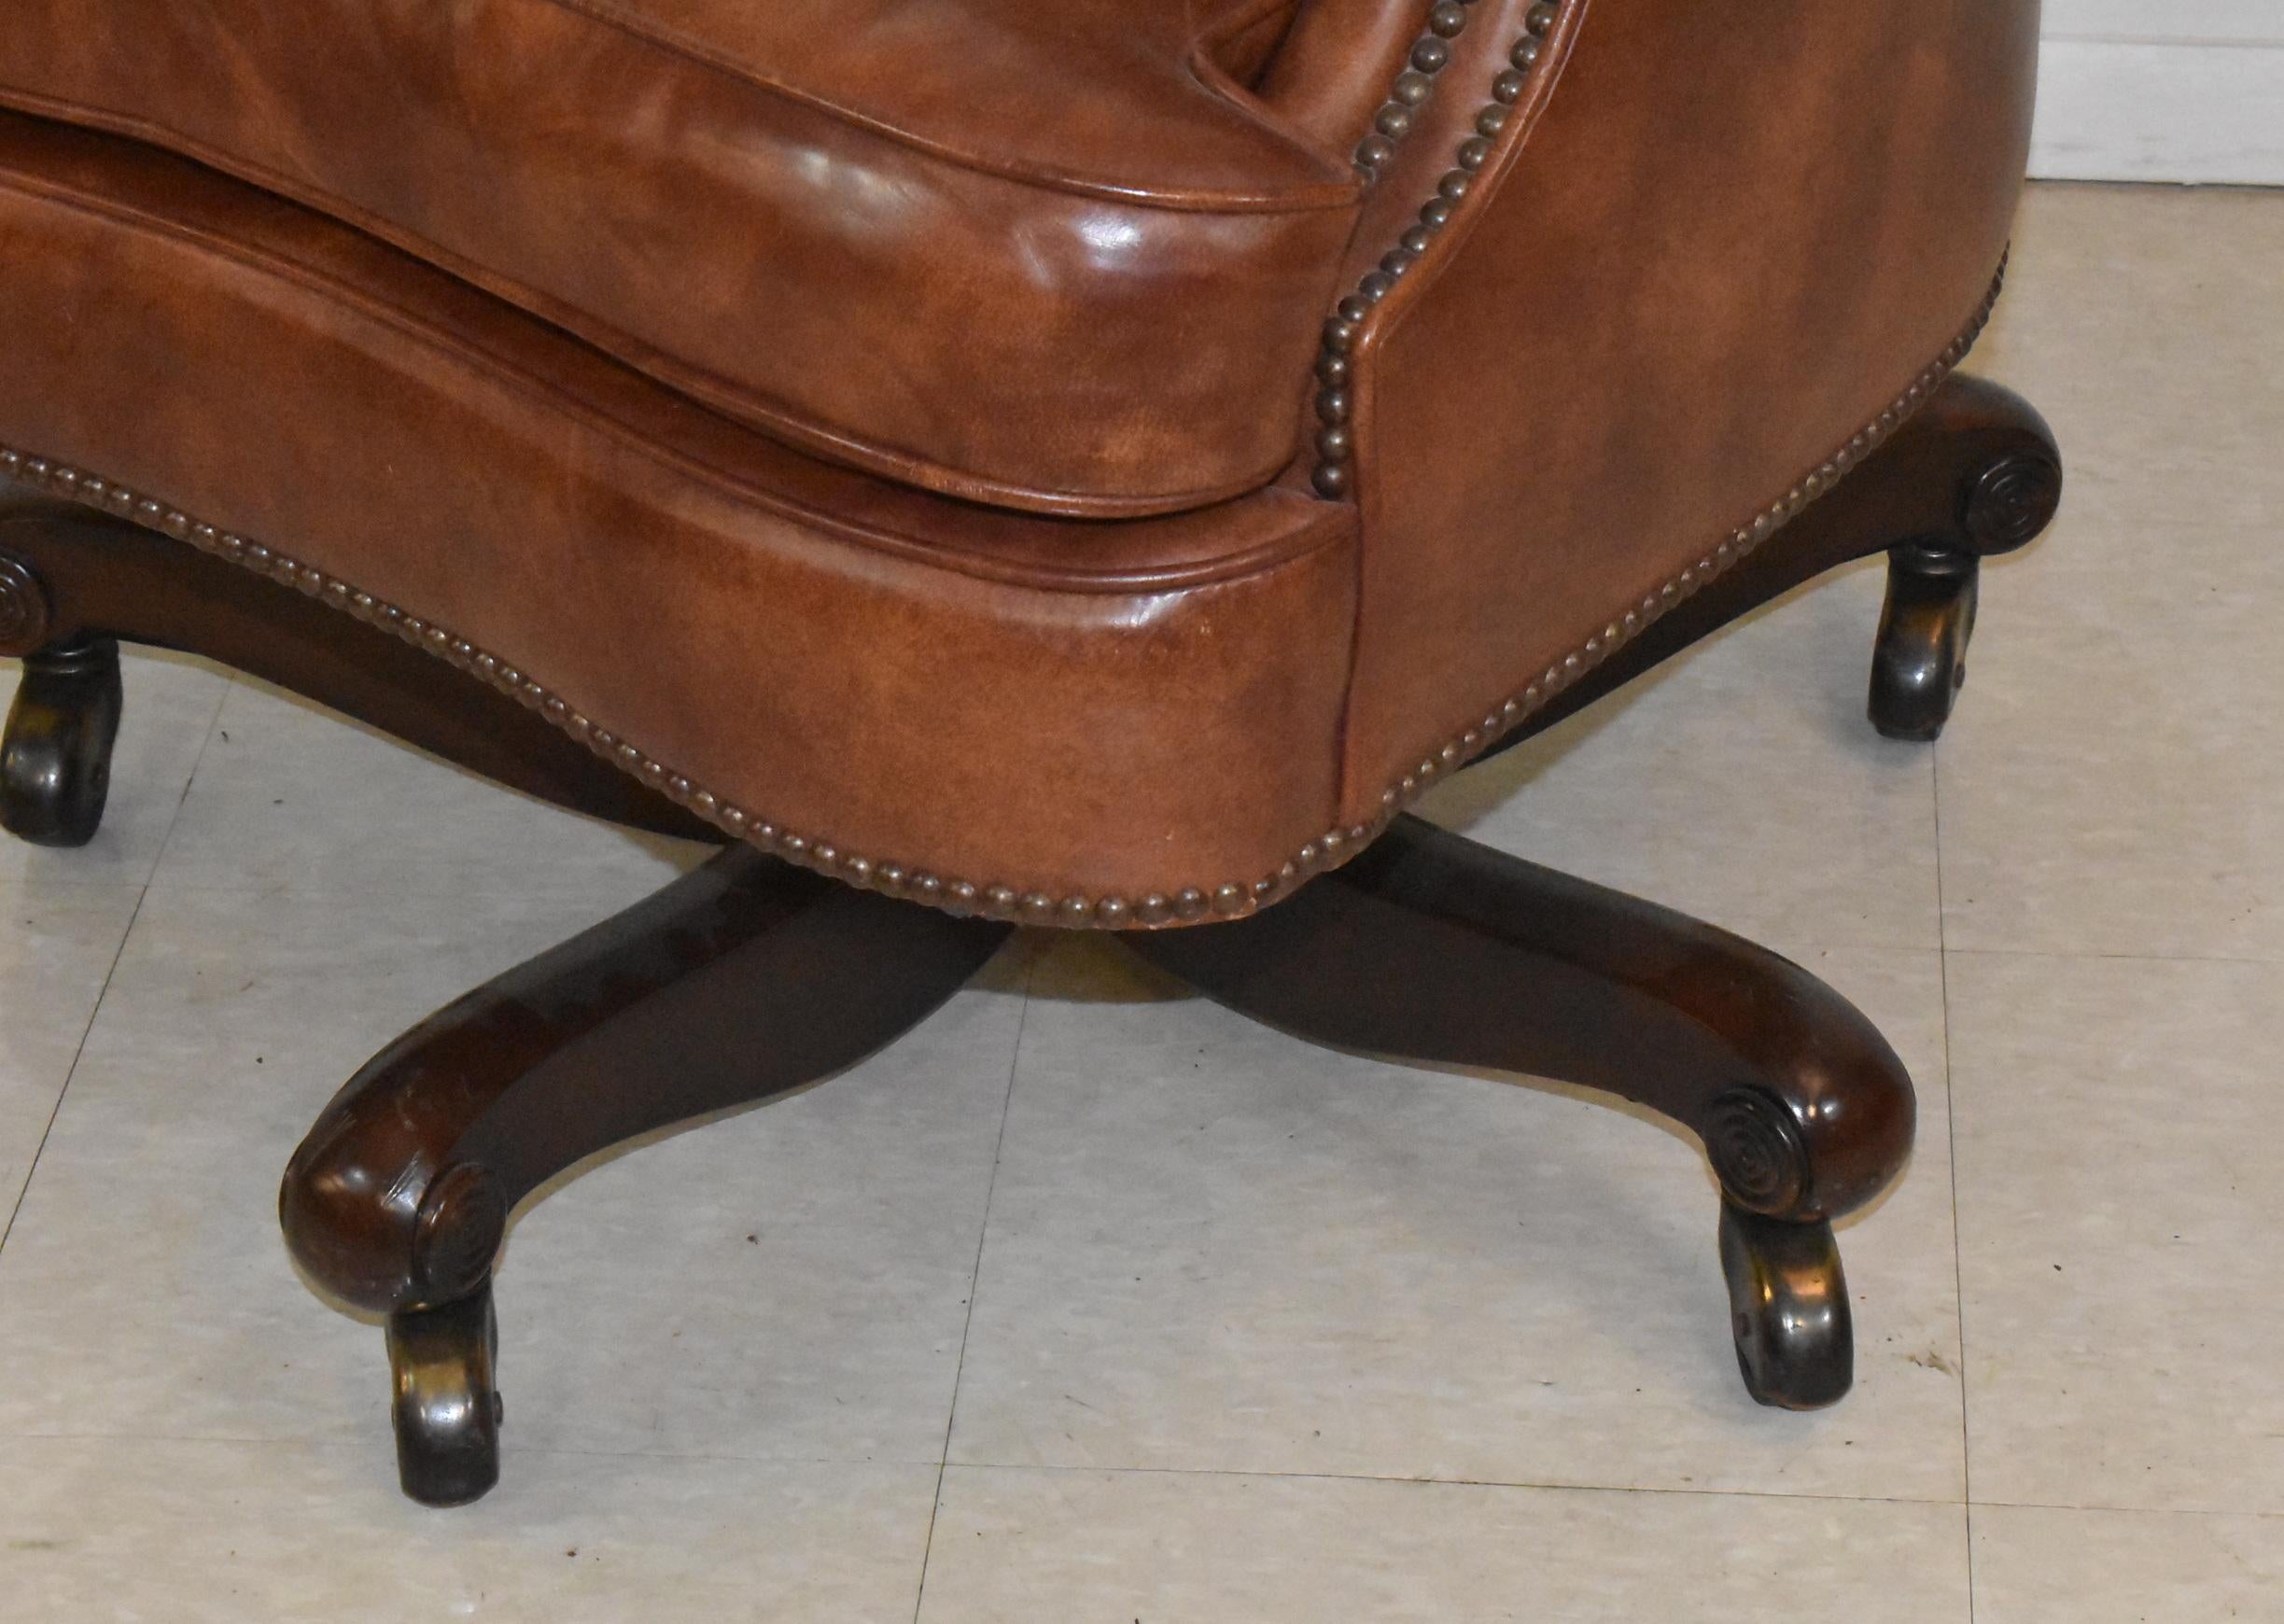 North American Baker Furniture Tufted Brown Leather Desk Office Chair